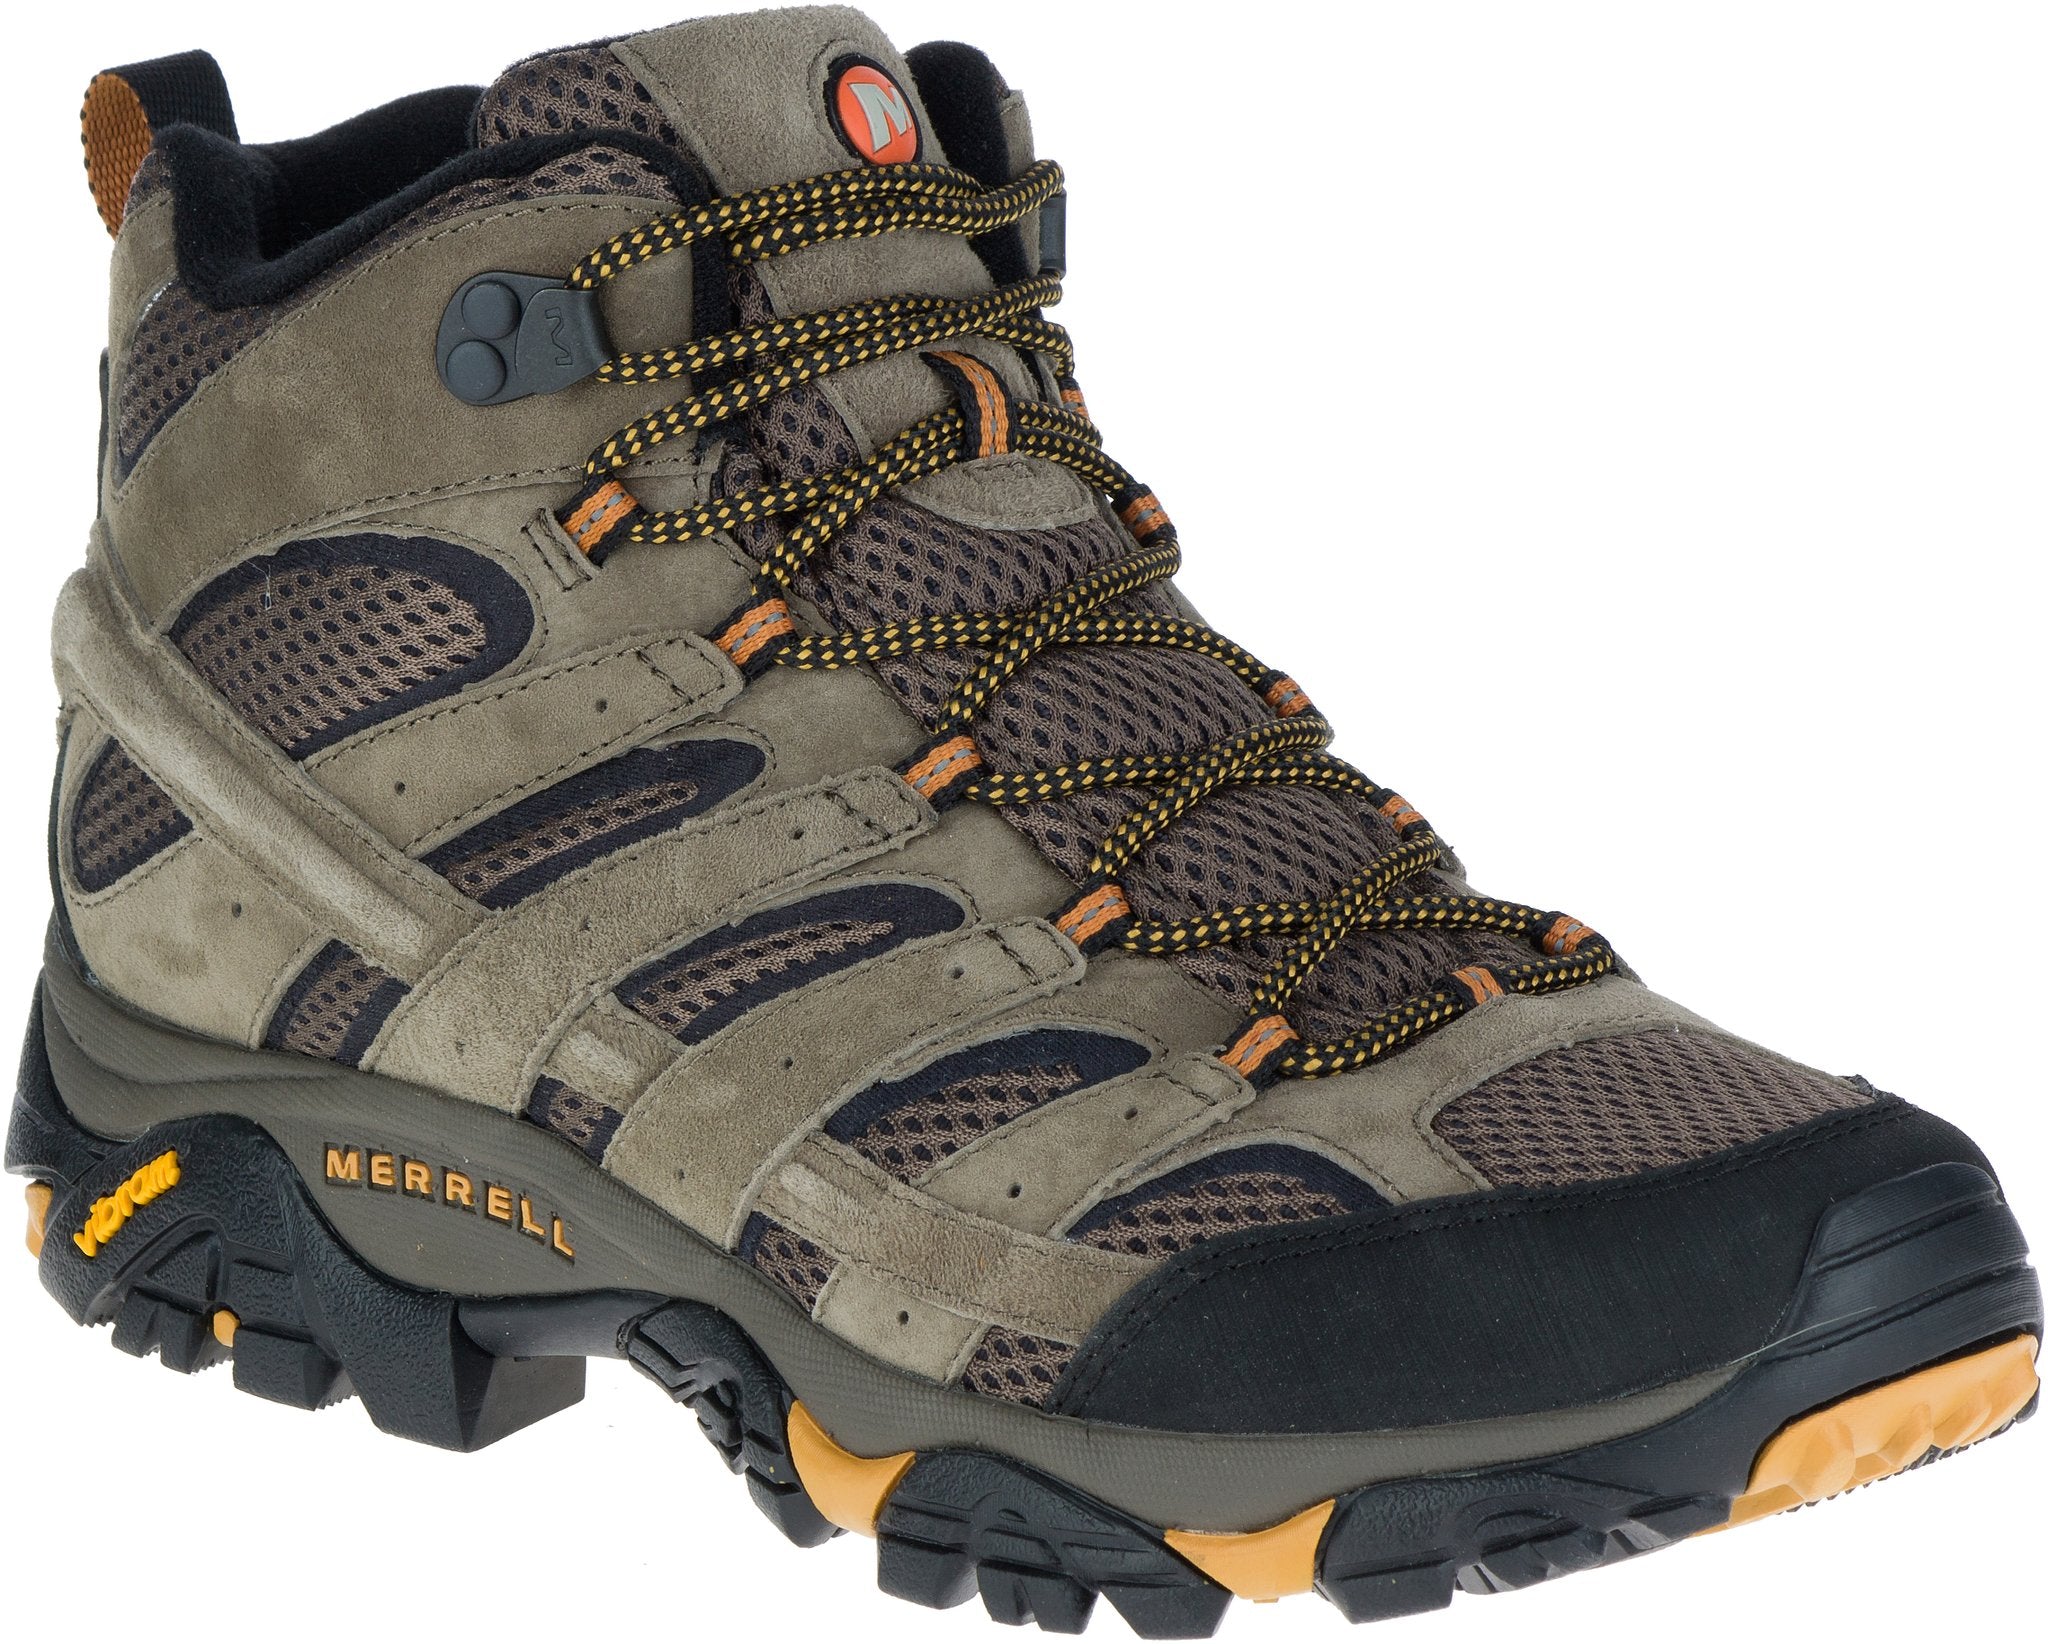 Merrell' Men's 2 Mid - Grey / Tan (Wide) – Outfitter